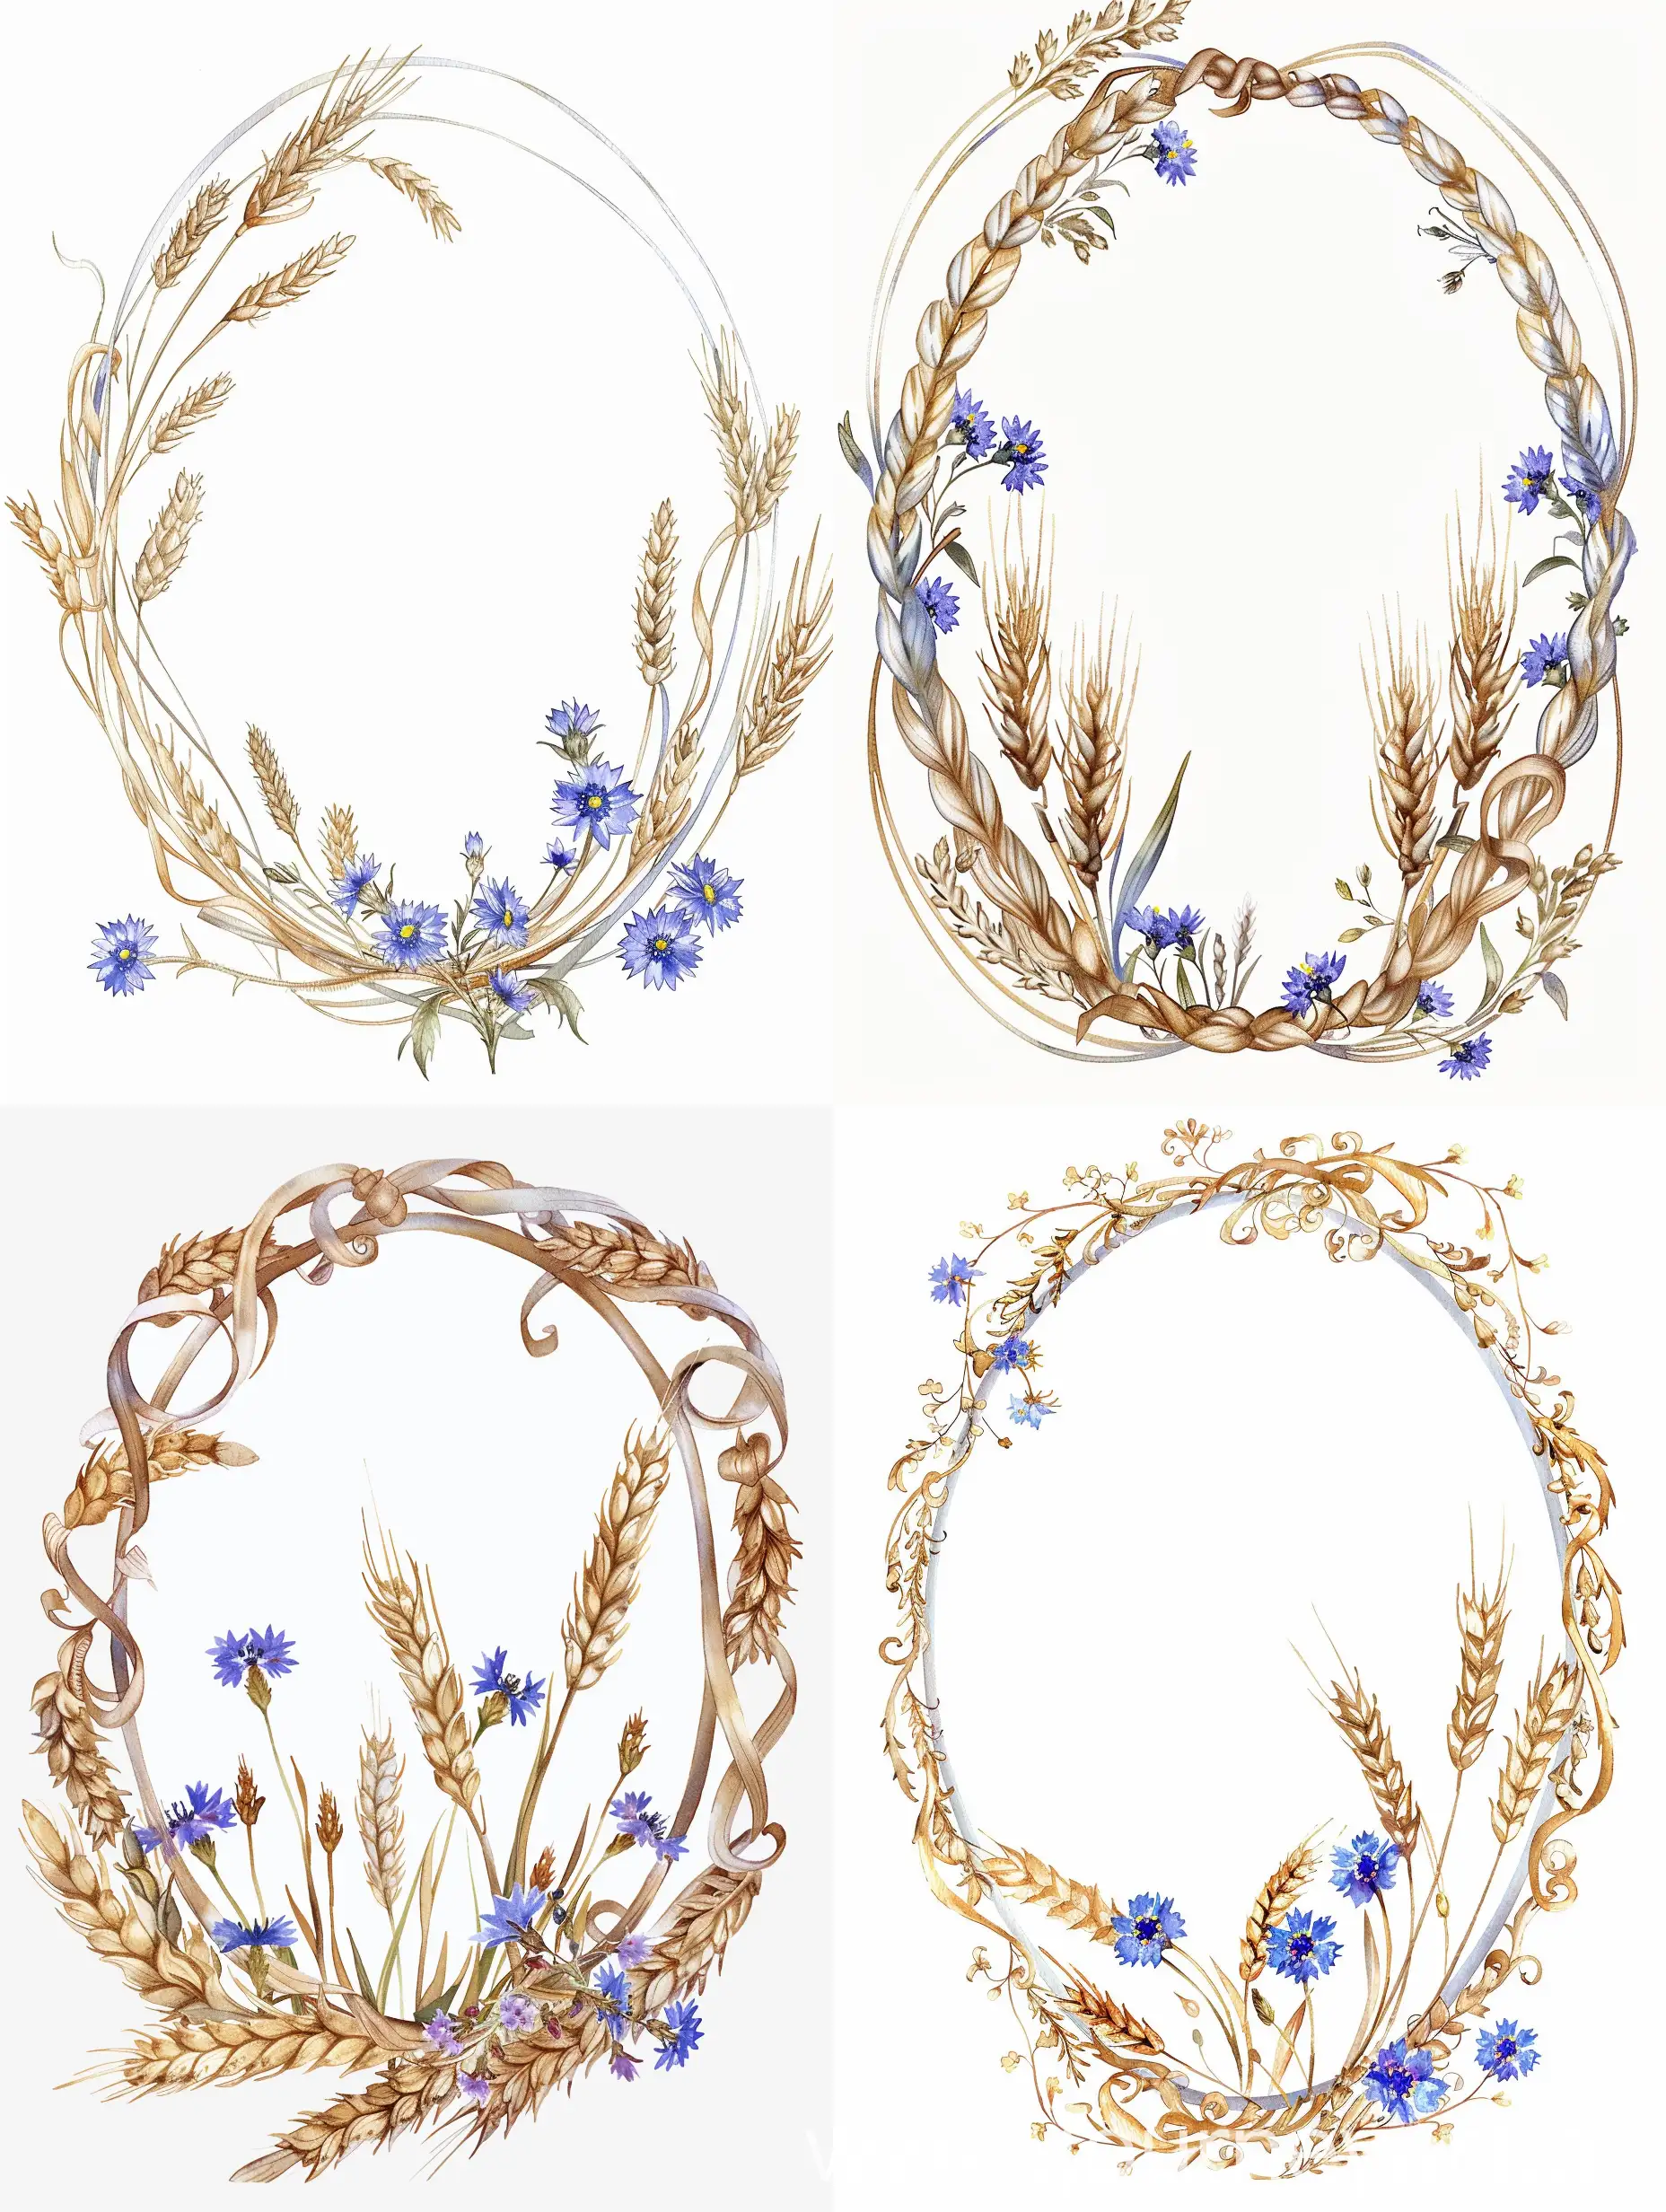 Elegant-Oval-Frame-with-Intricate-Wheat-and-Cornflower-Ornamentation-on-White-Background